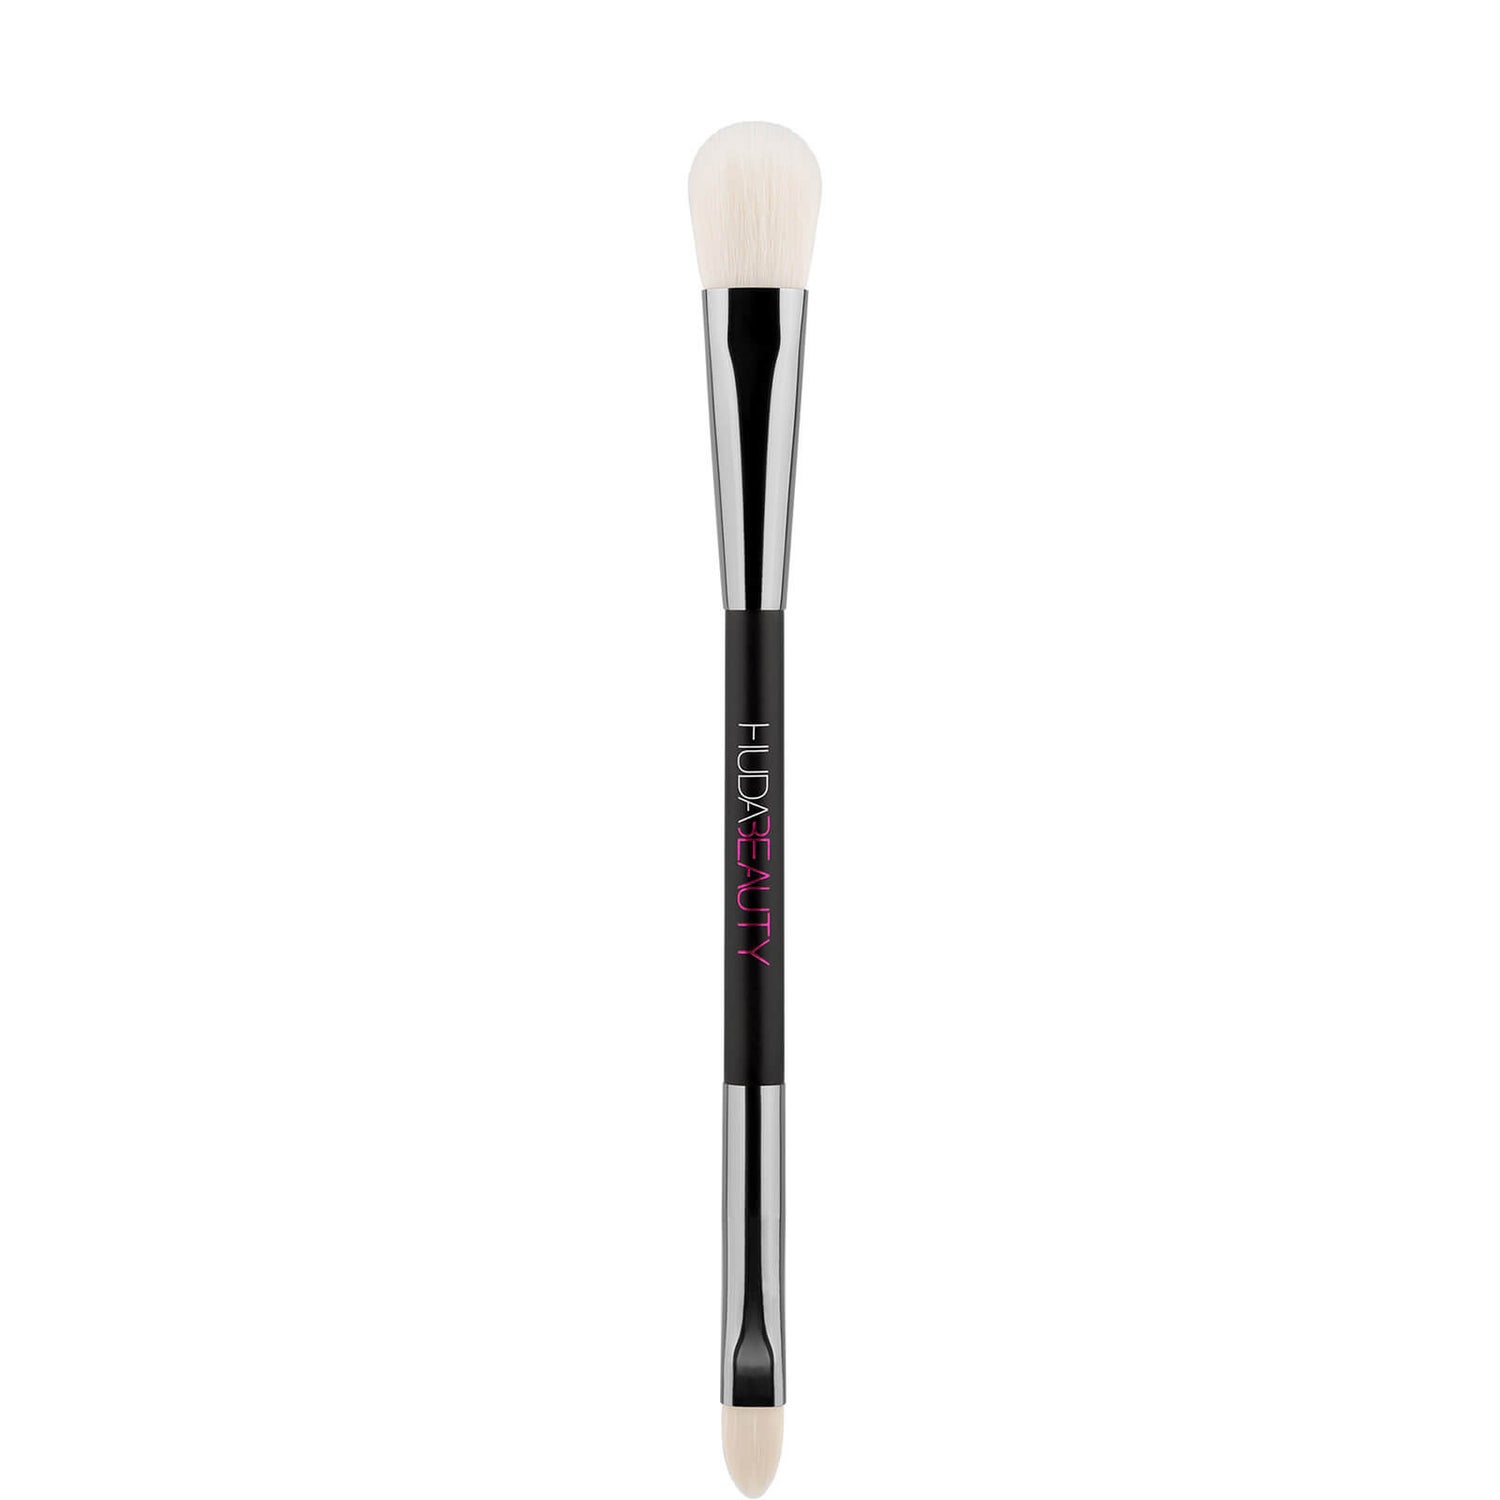 Huda Beauty Face Conceal & Blend Dual-Ended Concealing Complexion Brush